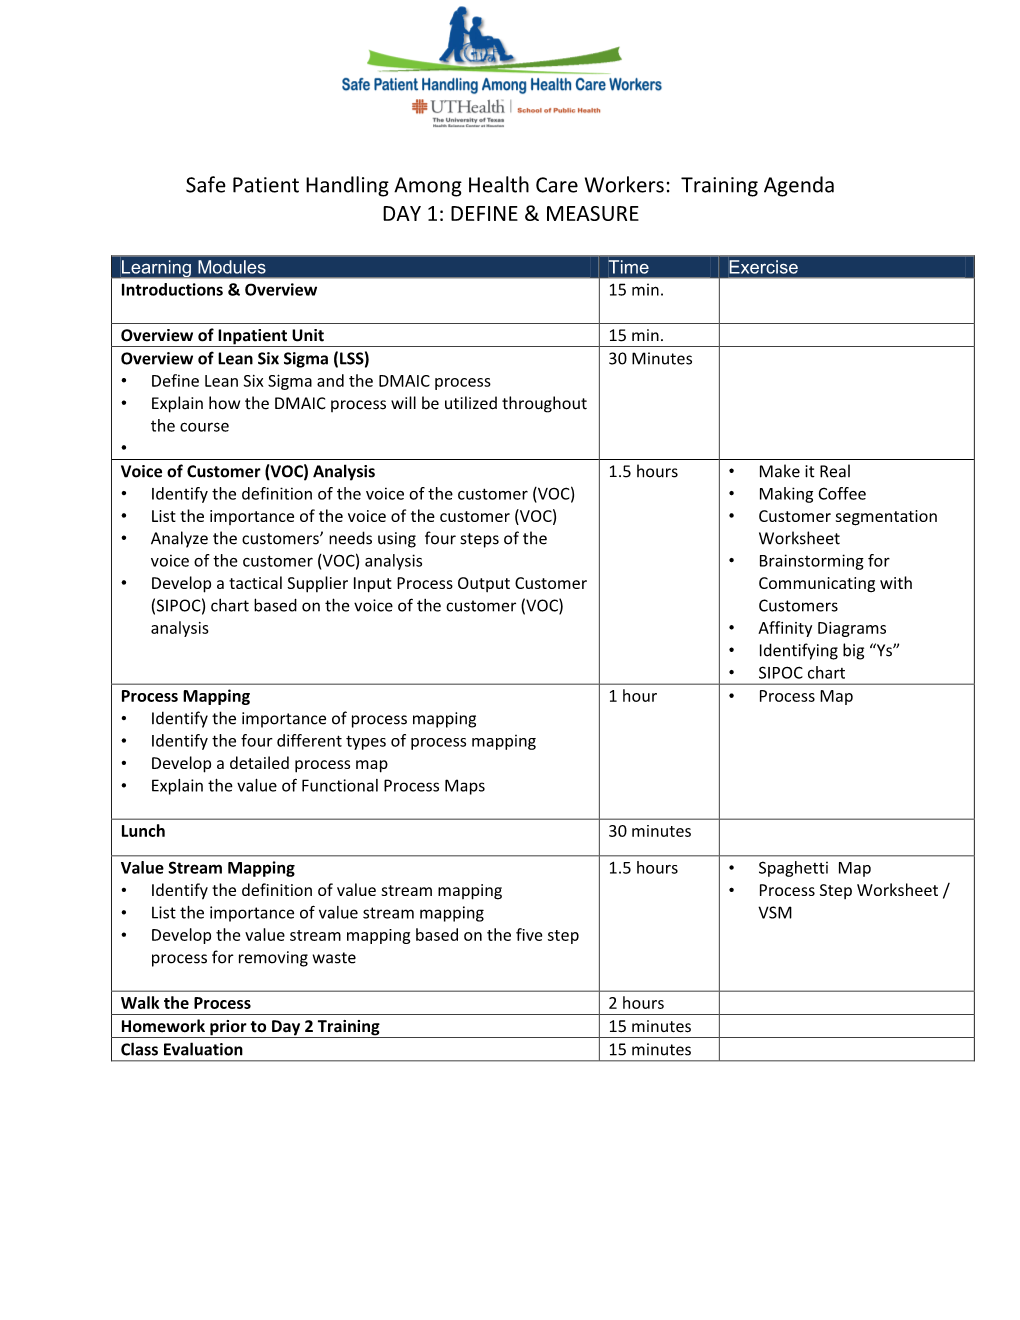 Safe Patient Handling Among Health Care Workers: Training Agenda DAY 1: DEFINE & MEASURE